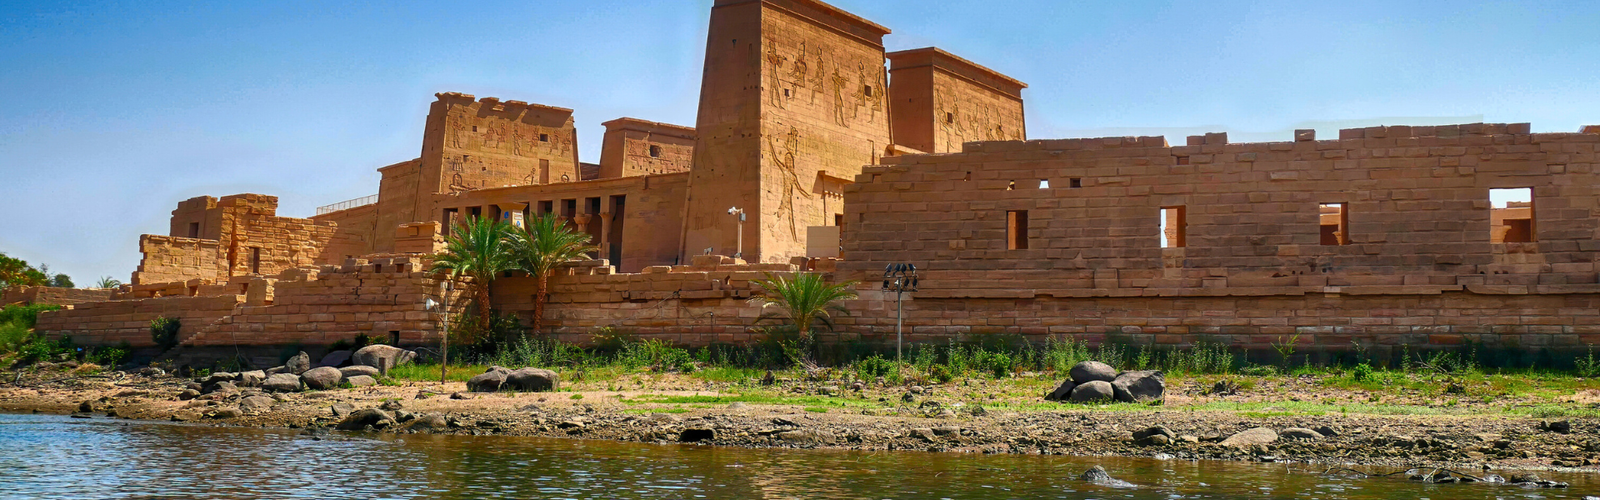 The Philae Temple of Aswan: A Majestic Ancient Wonder